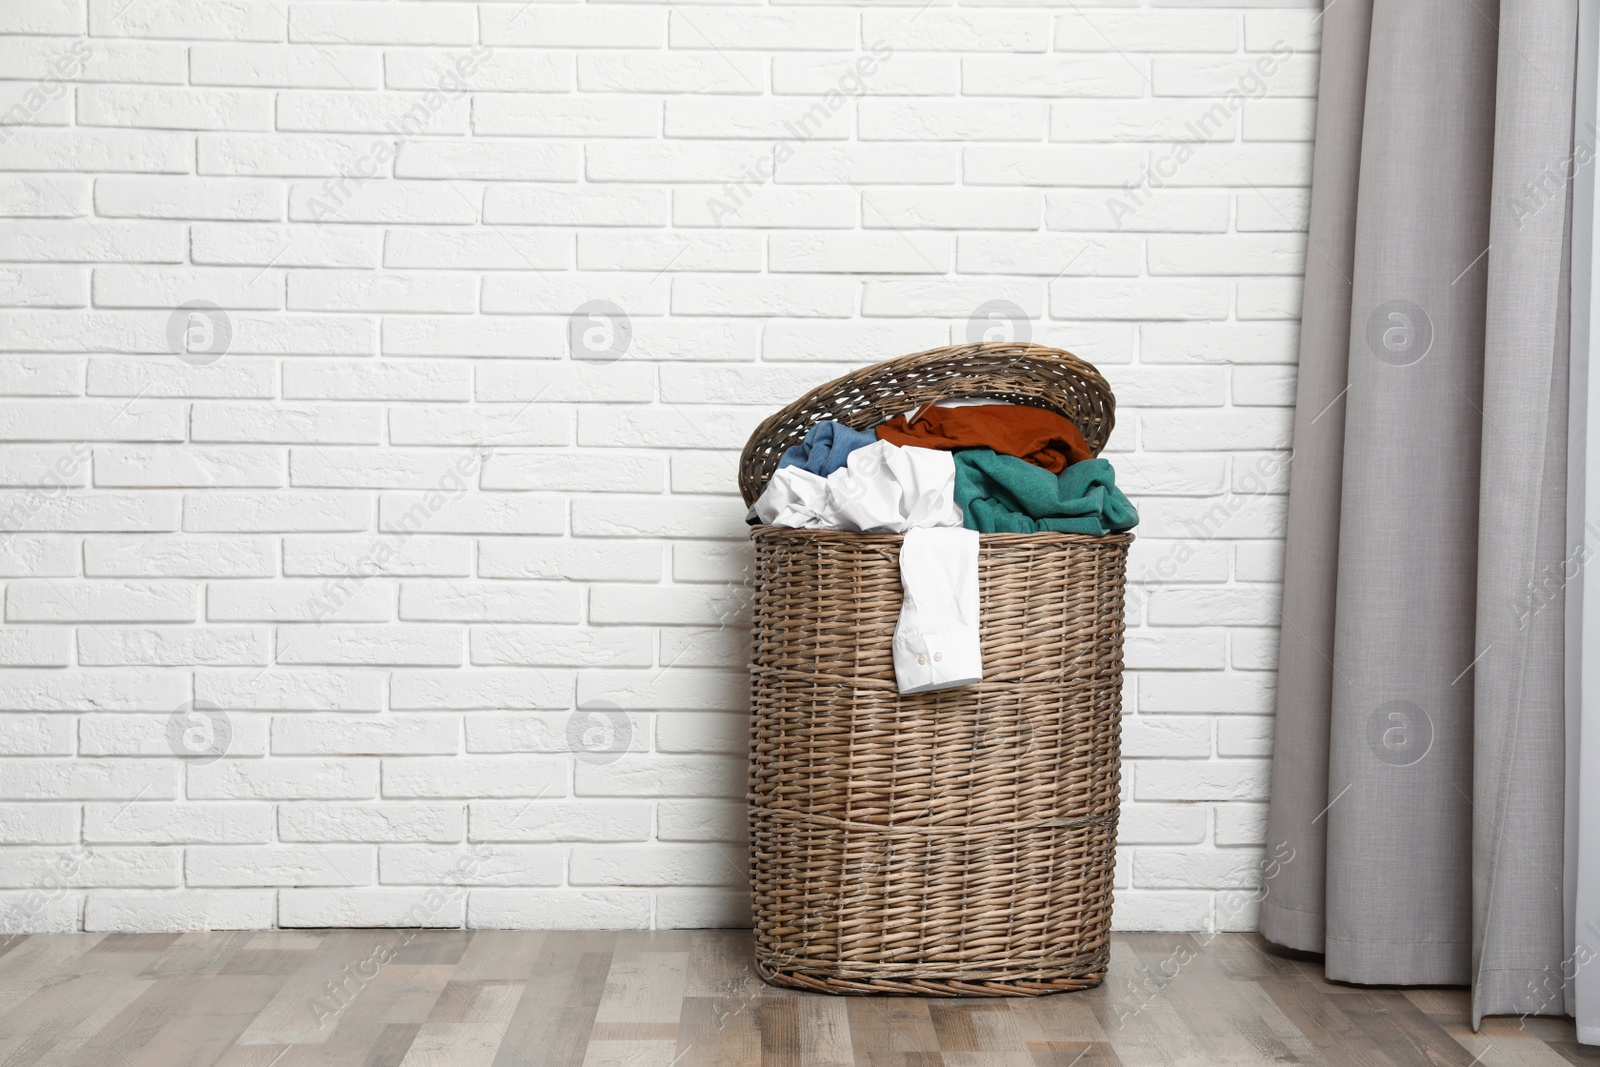 Photo of Wicker laundry basket full of dirty clothes near brick wall in room. Space for text